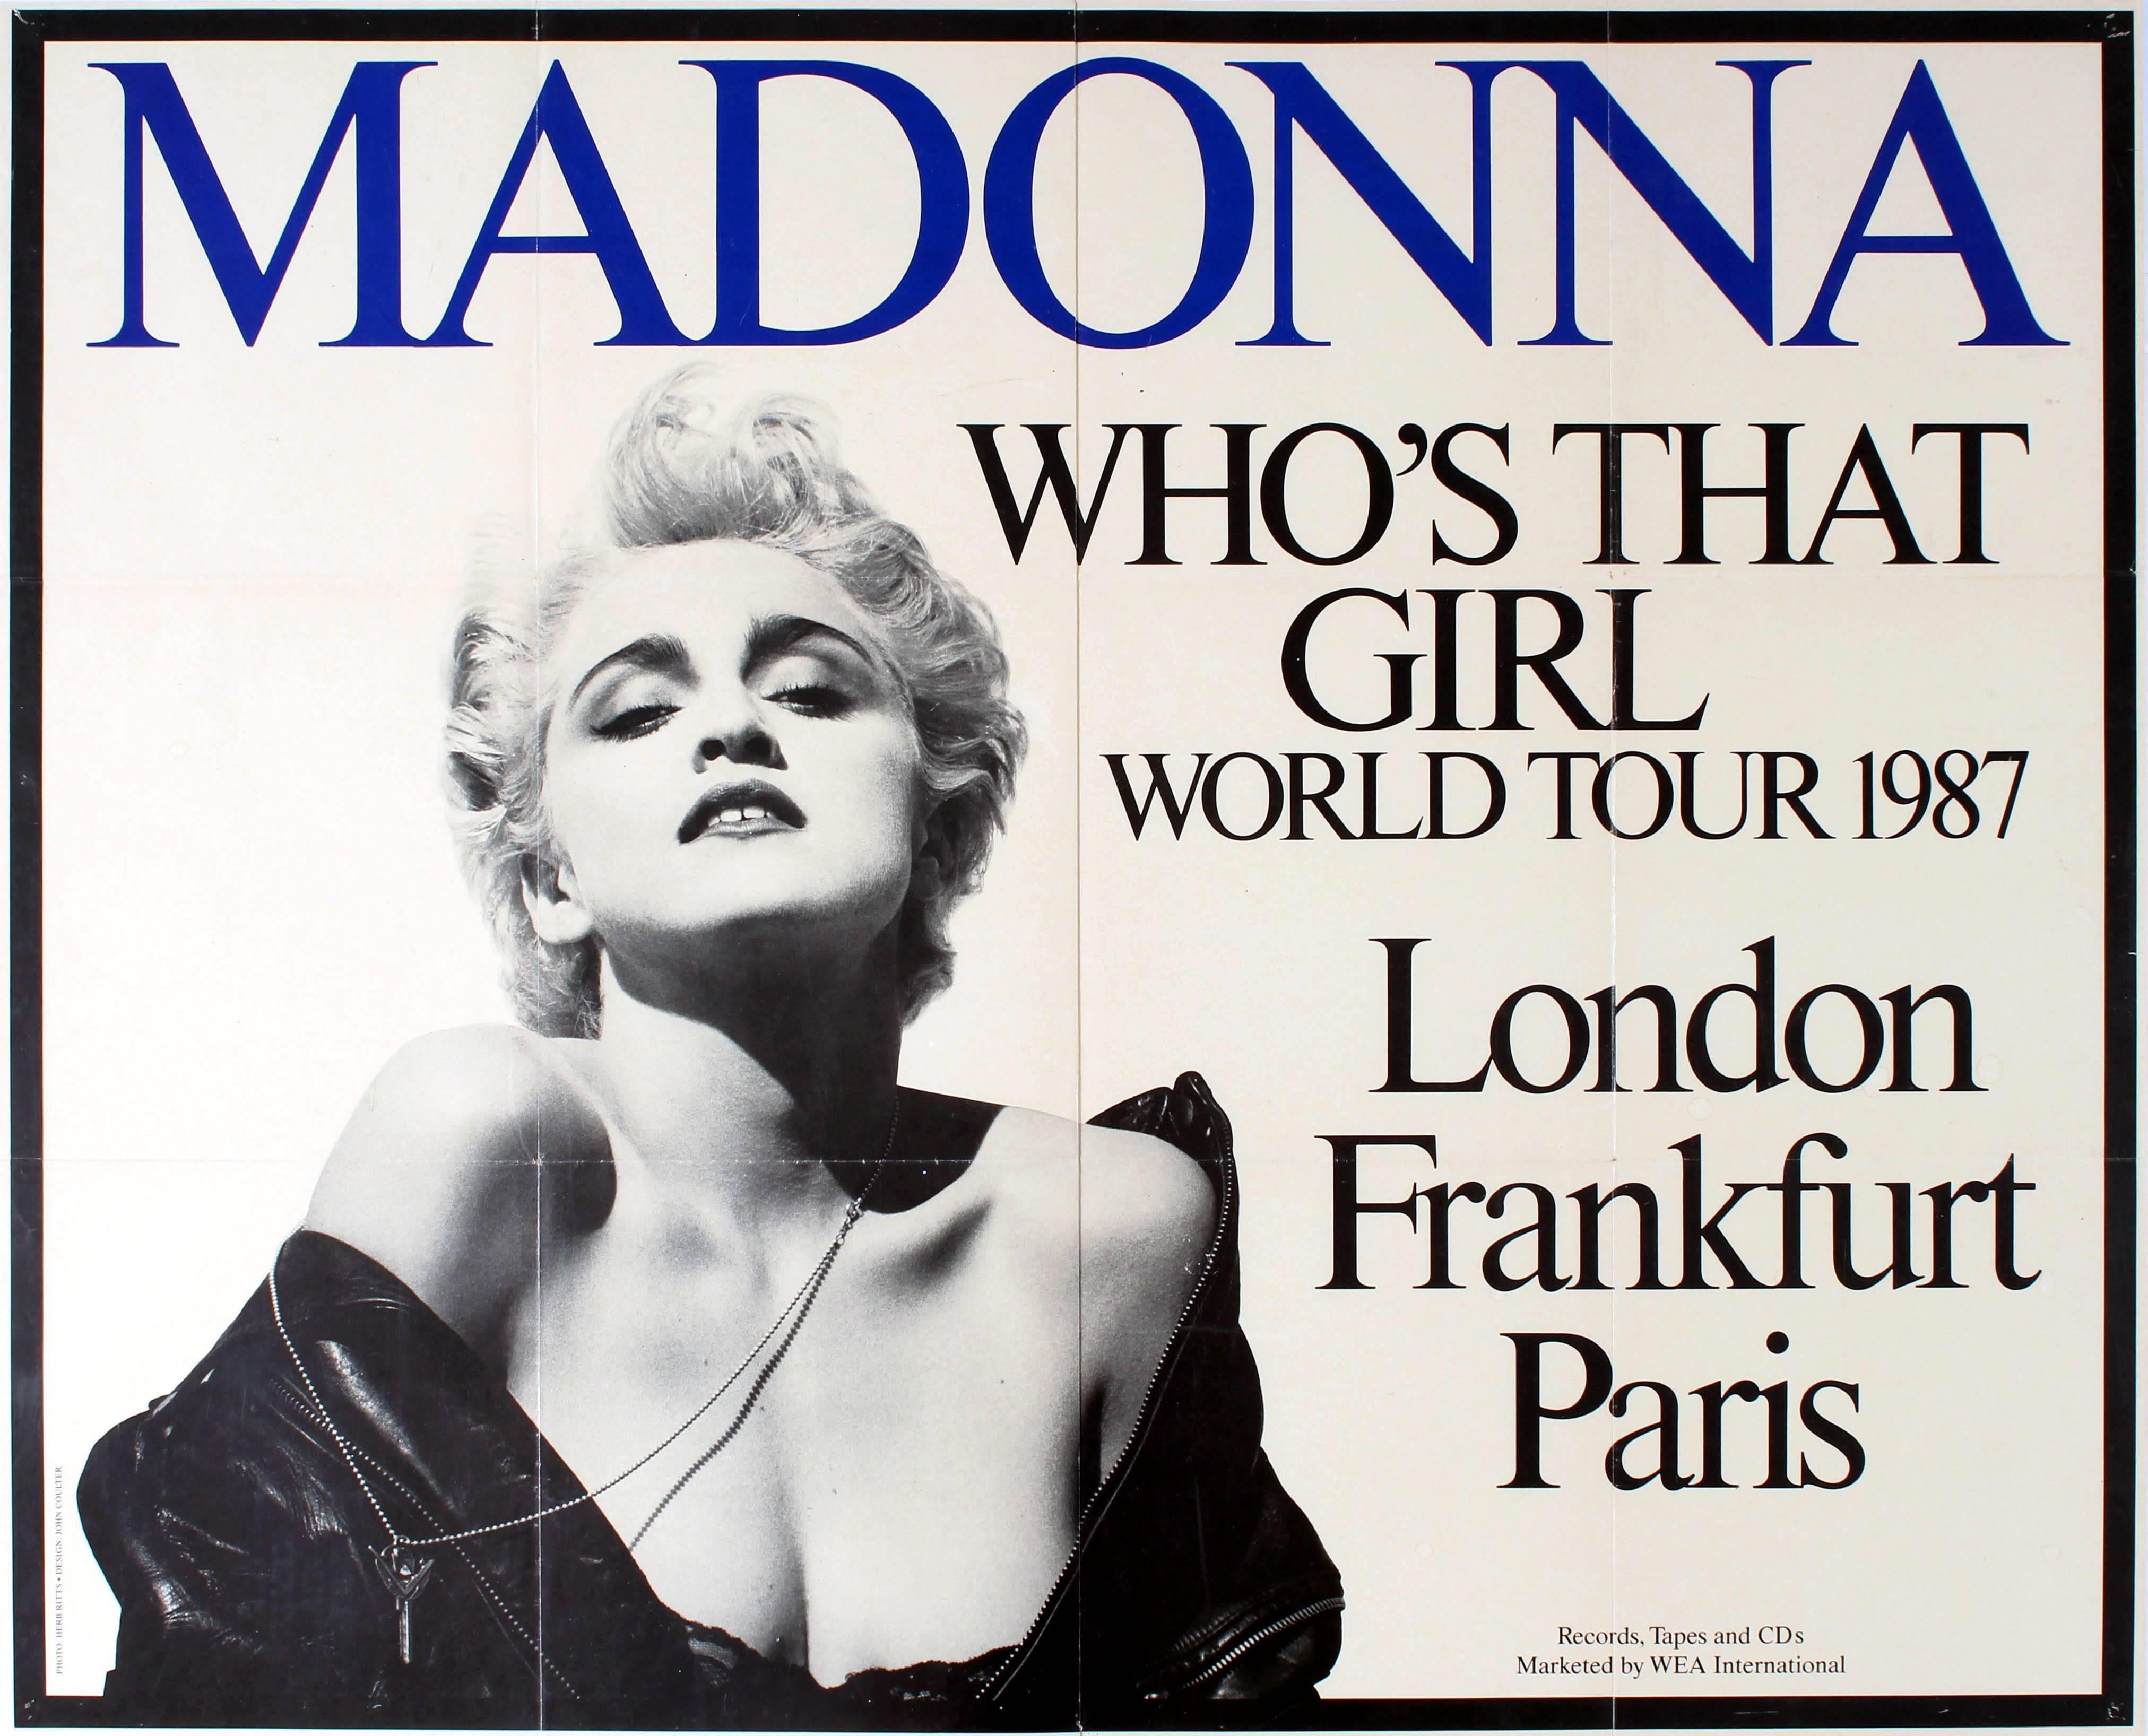 Unknown Print - Original Vintage 1987 "Queen Of Pop" Music Tour Poster - Madonna Who's That Girl